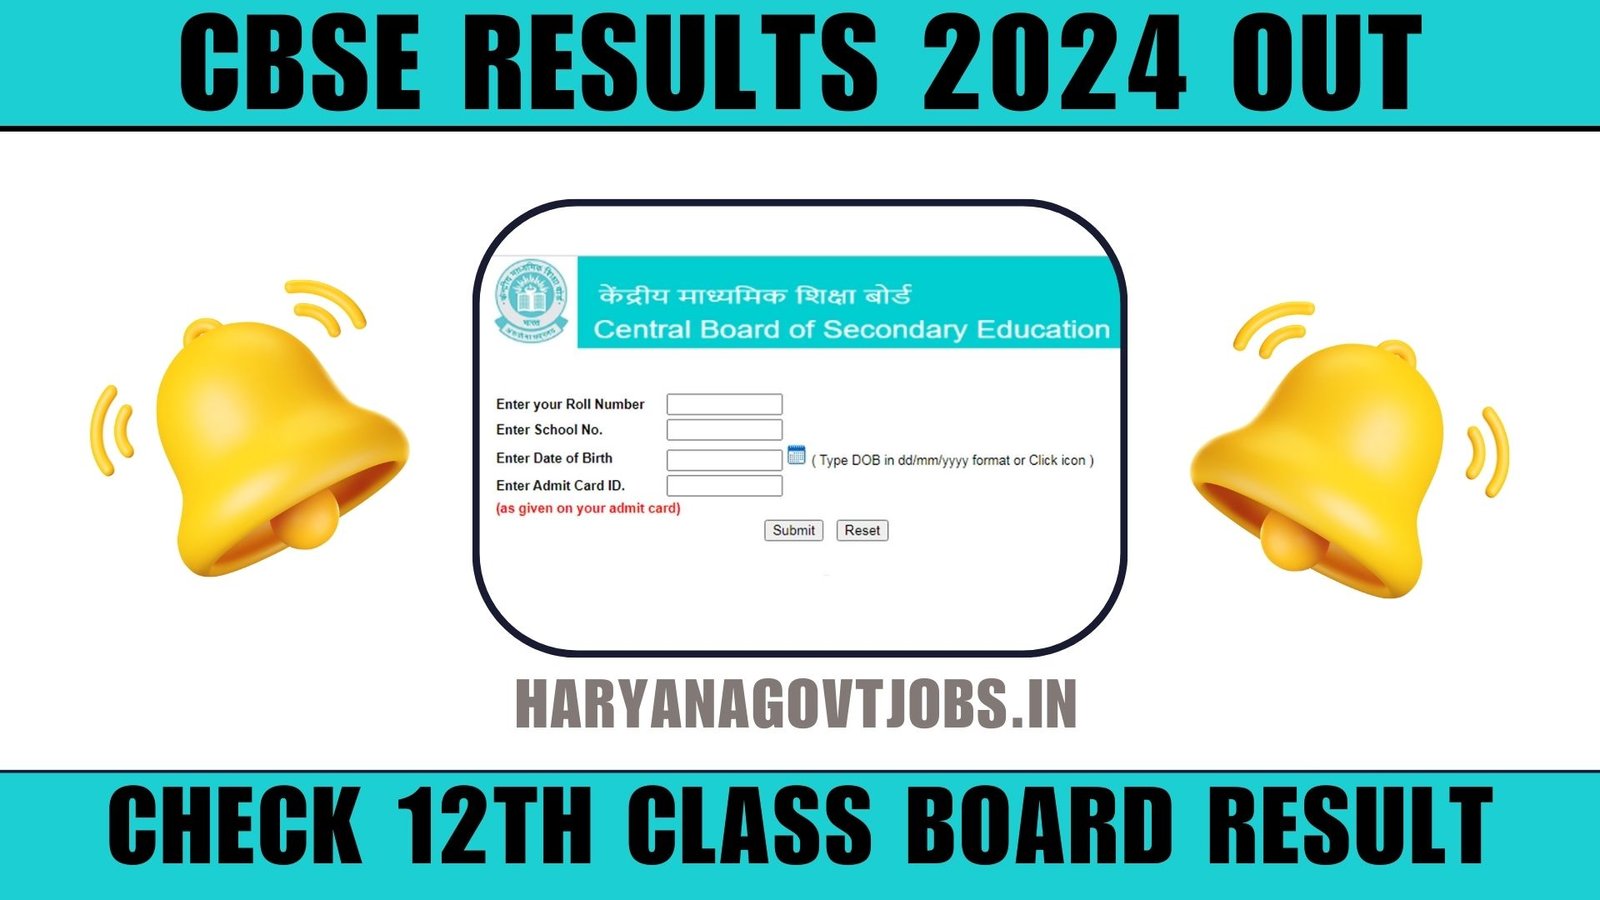 CBSE Results 2024 Out : Check 12th Class Board Result